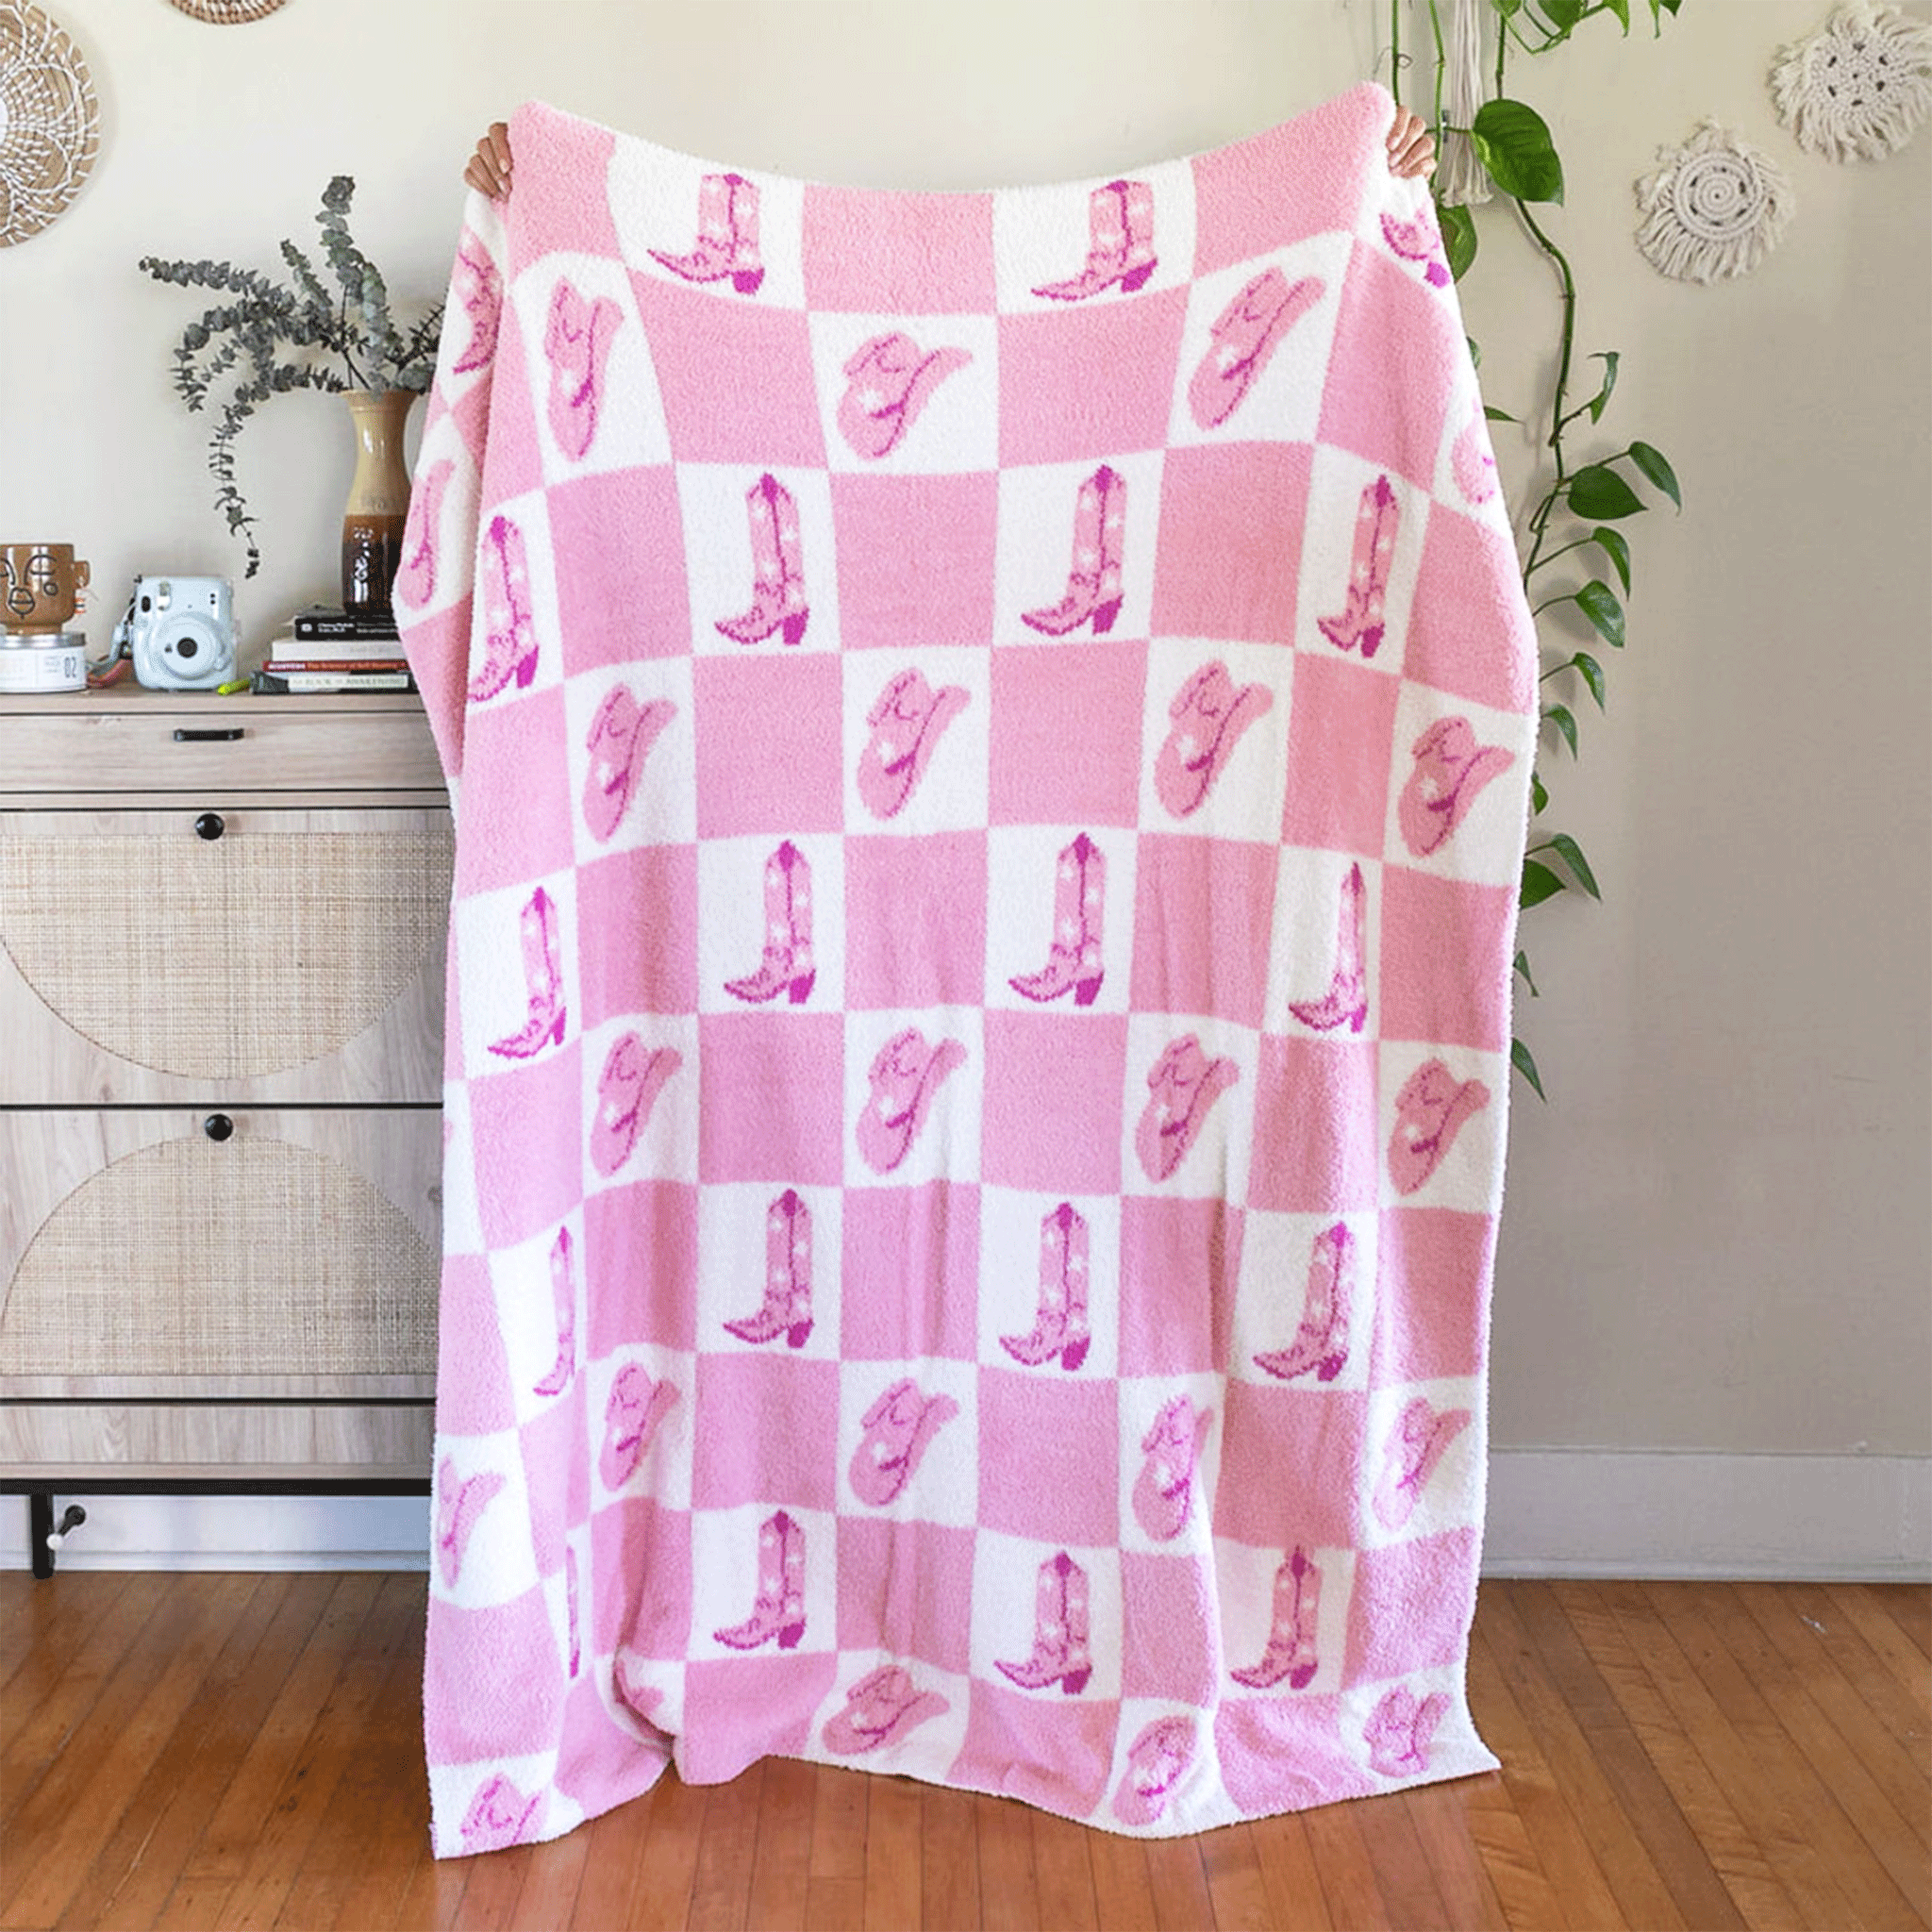 A full length view of the pink and white checkered blanket with alternating pink cowgirl hats and cowgirl boots in each white square.